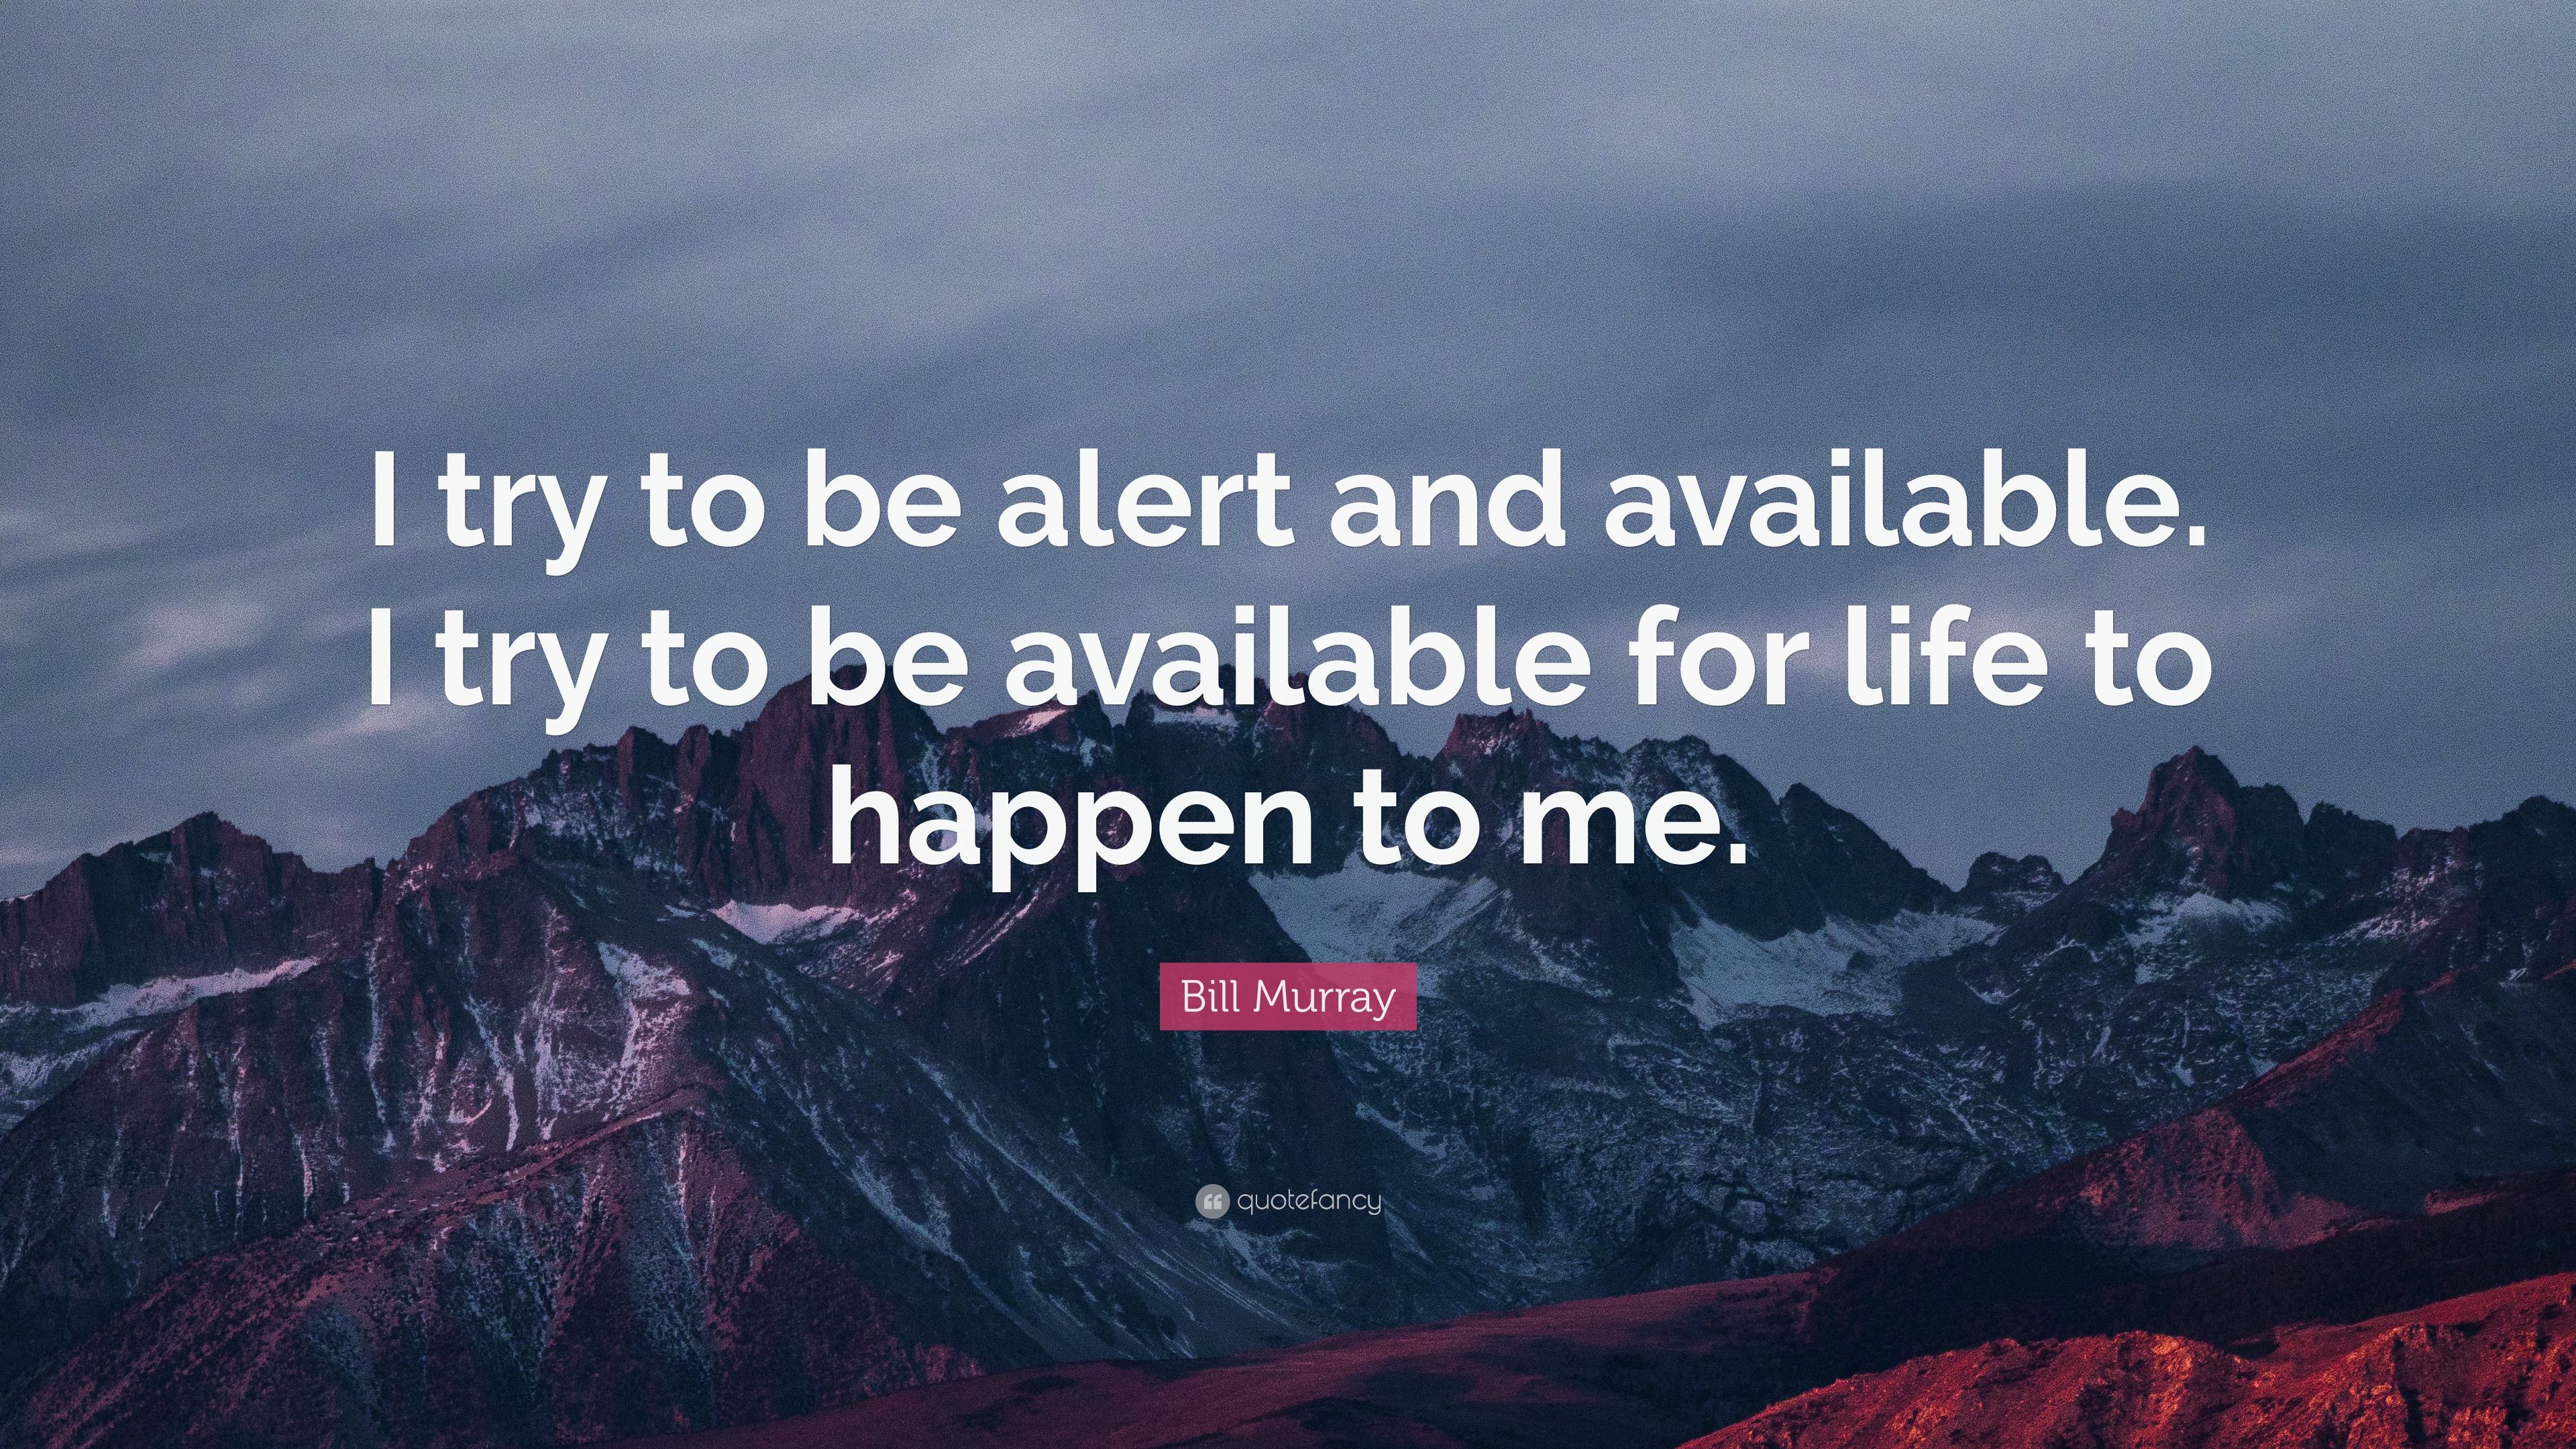 Bill Murray Quote: “I try to be alert and available. I try to be